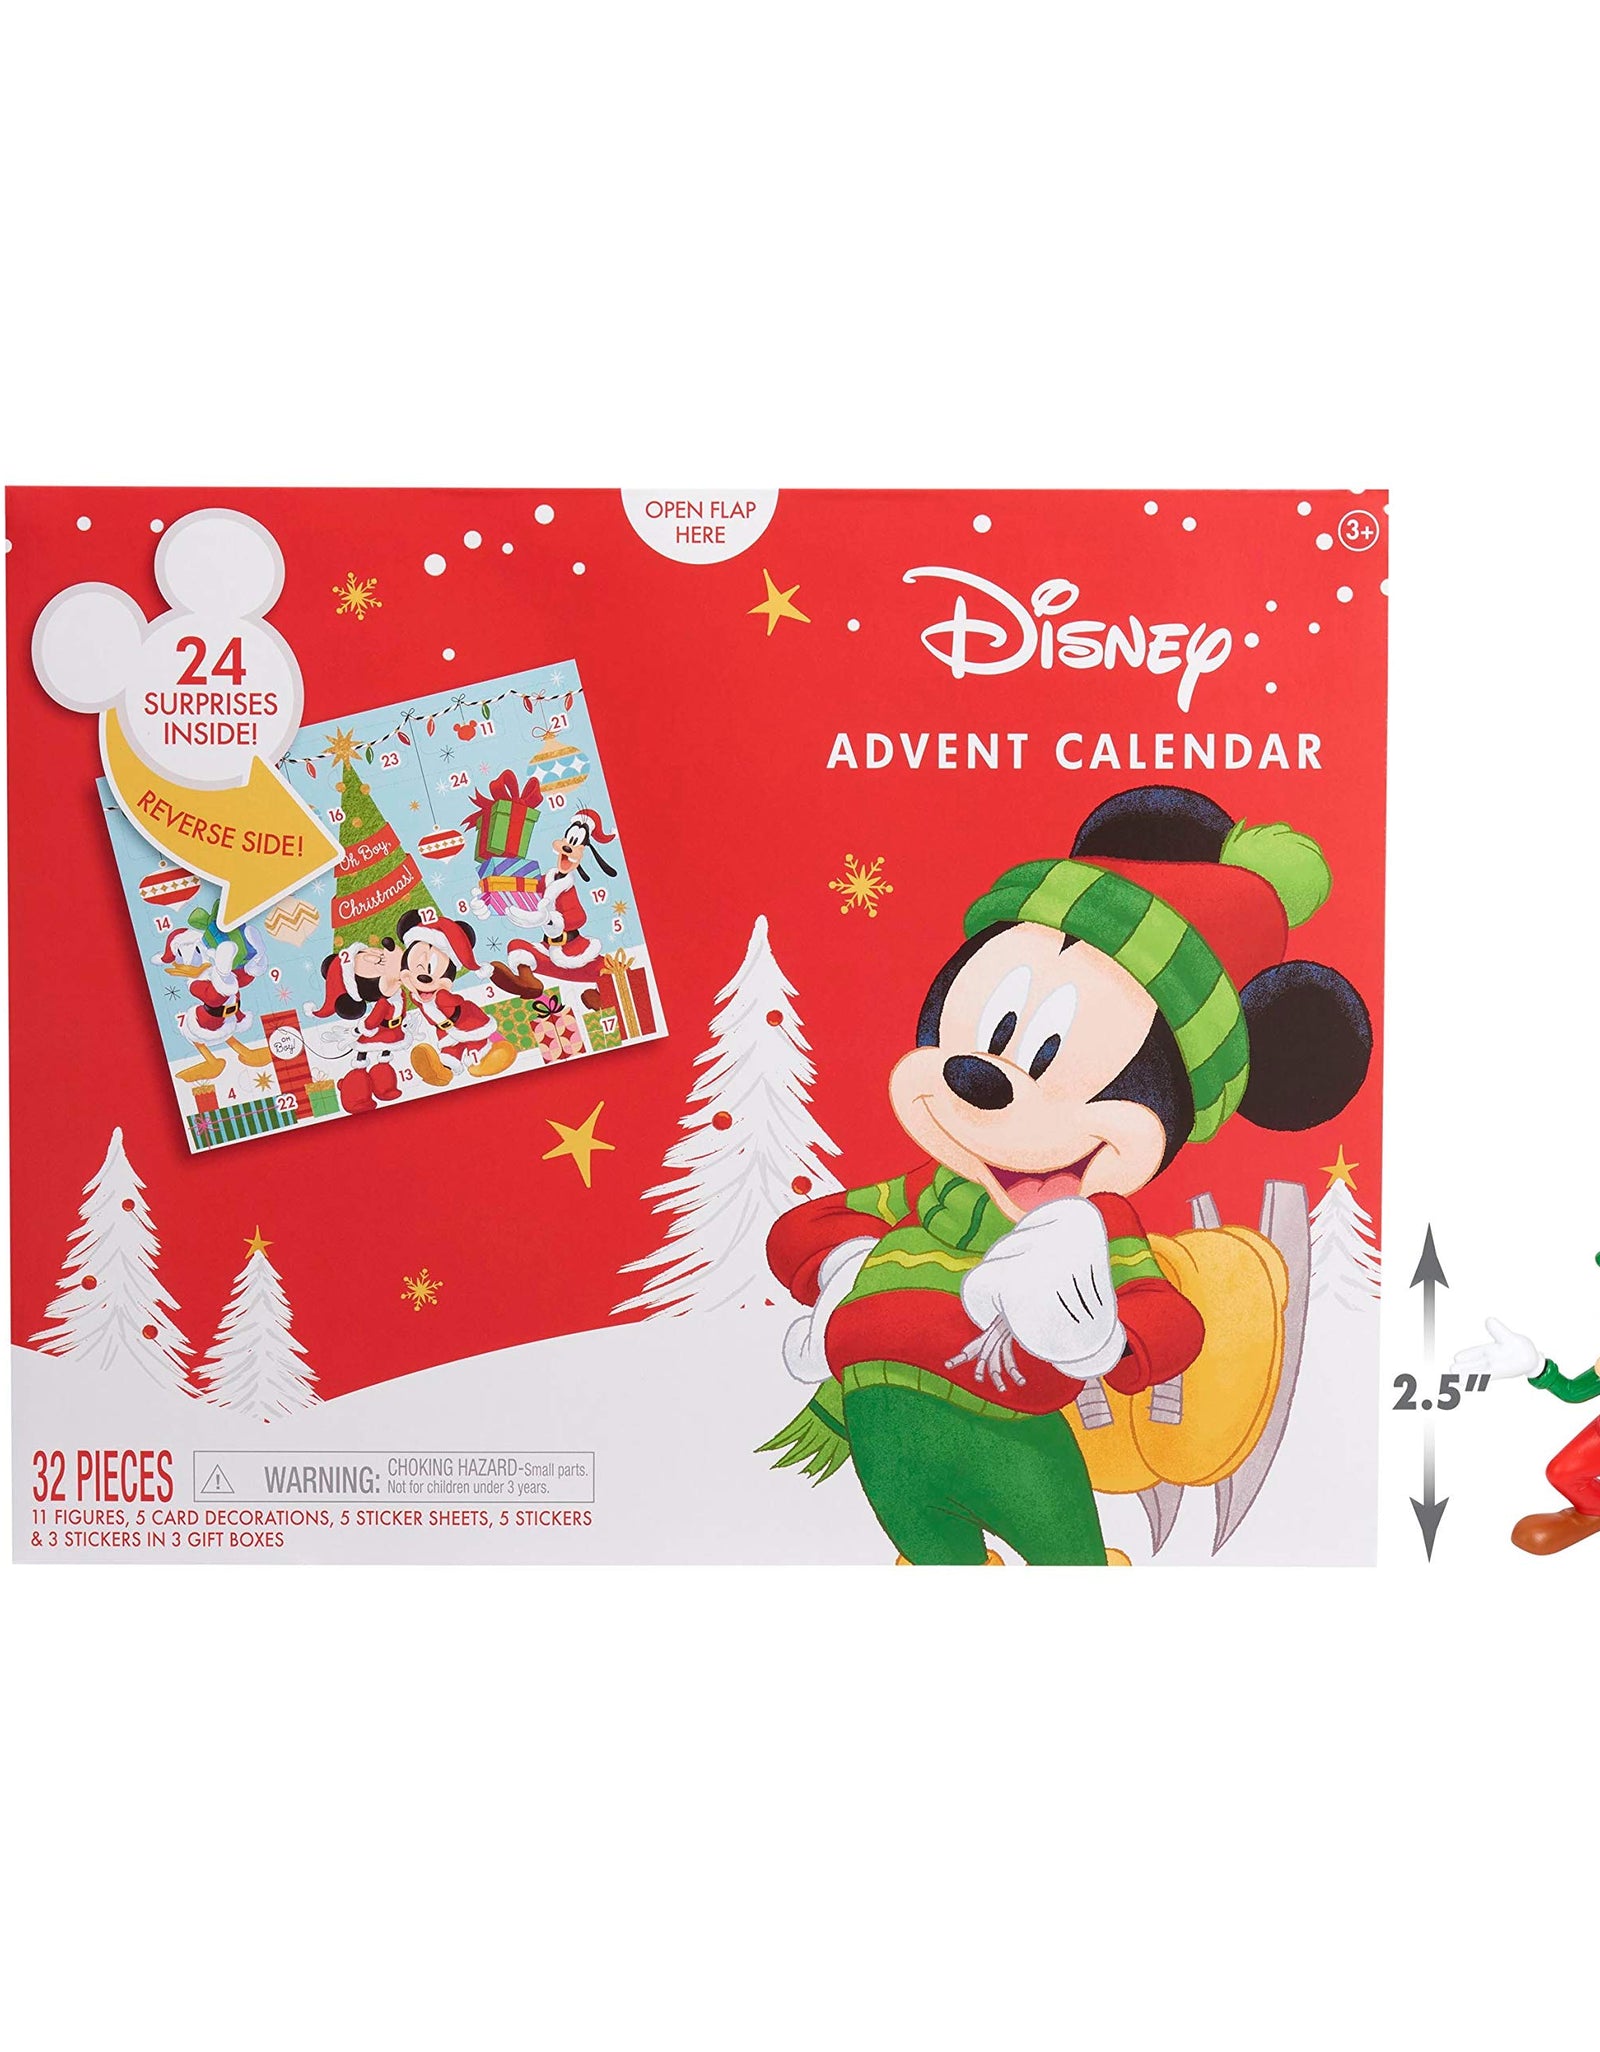 Disney Classic Advent Calendar, 32 Pieces, Figures, Decorations, and Stickers, by Just Play